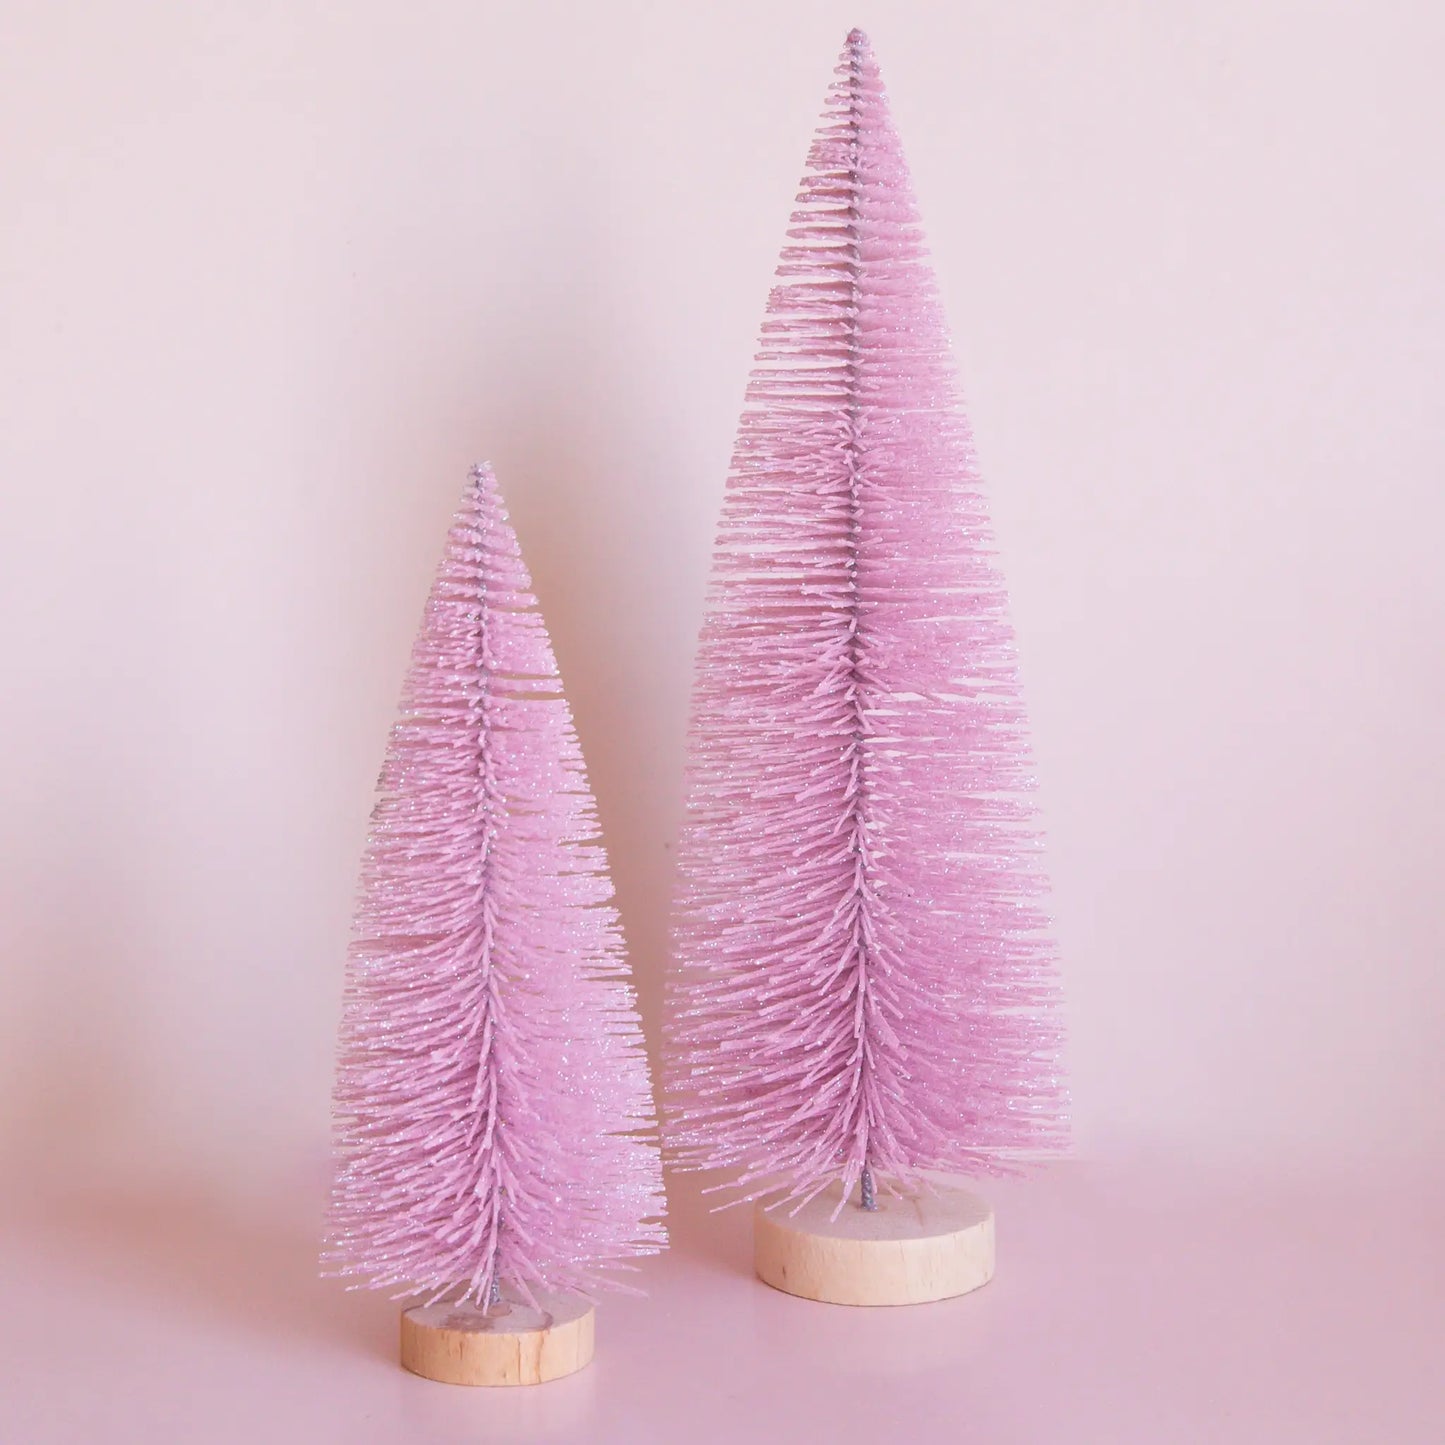 Bottle Brush Tree - Cool Pink (Sparkle Christmas Tree): 13 inch